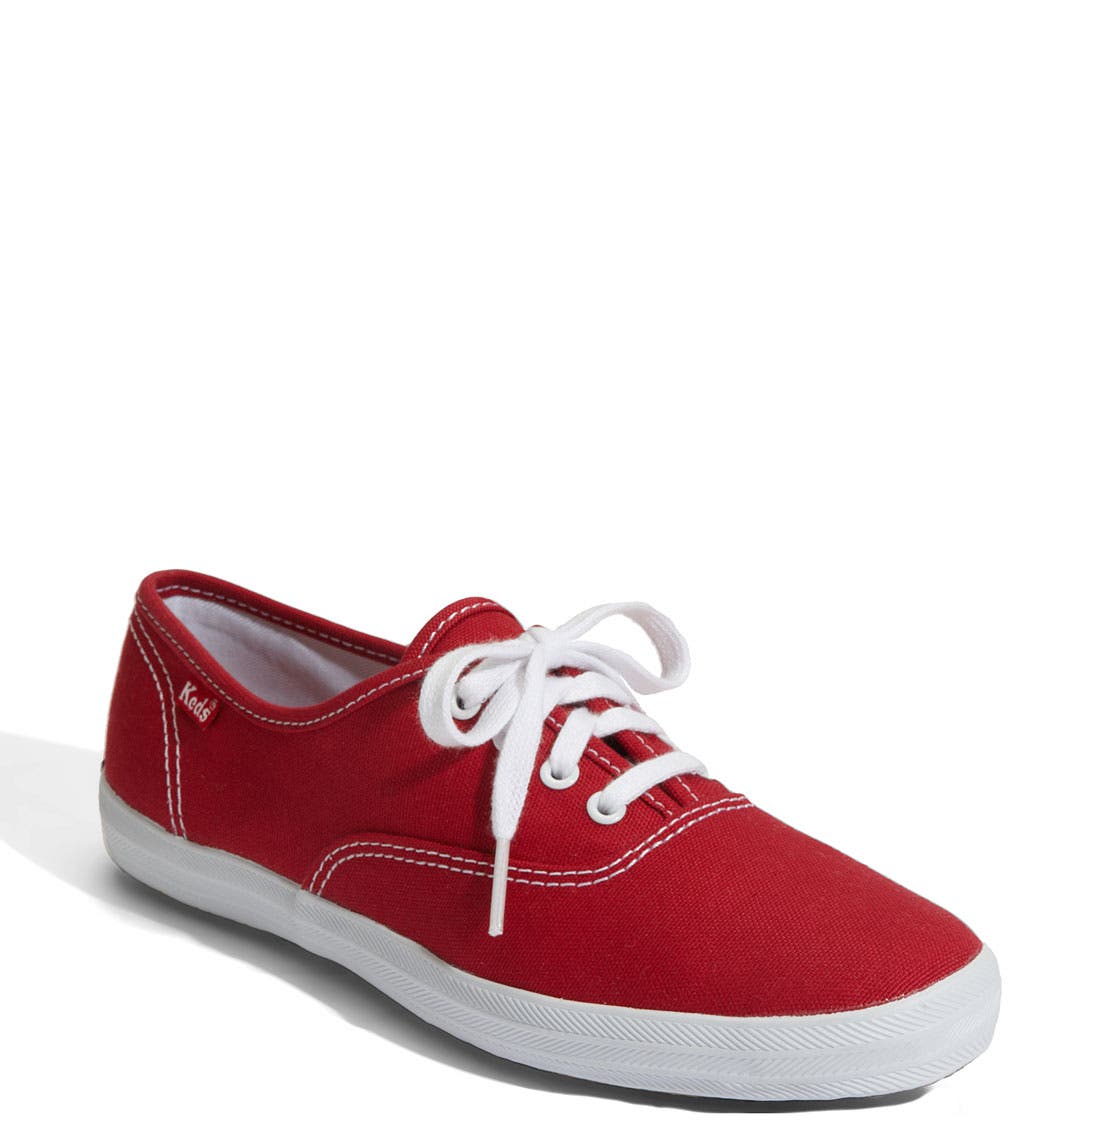 all red keds